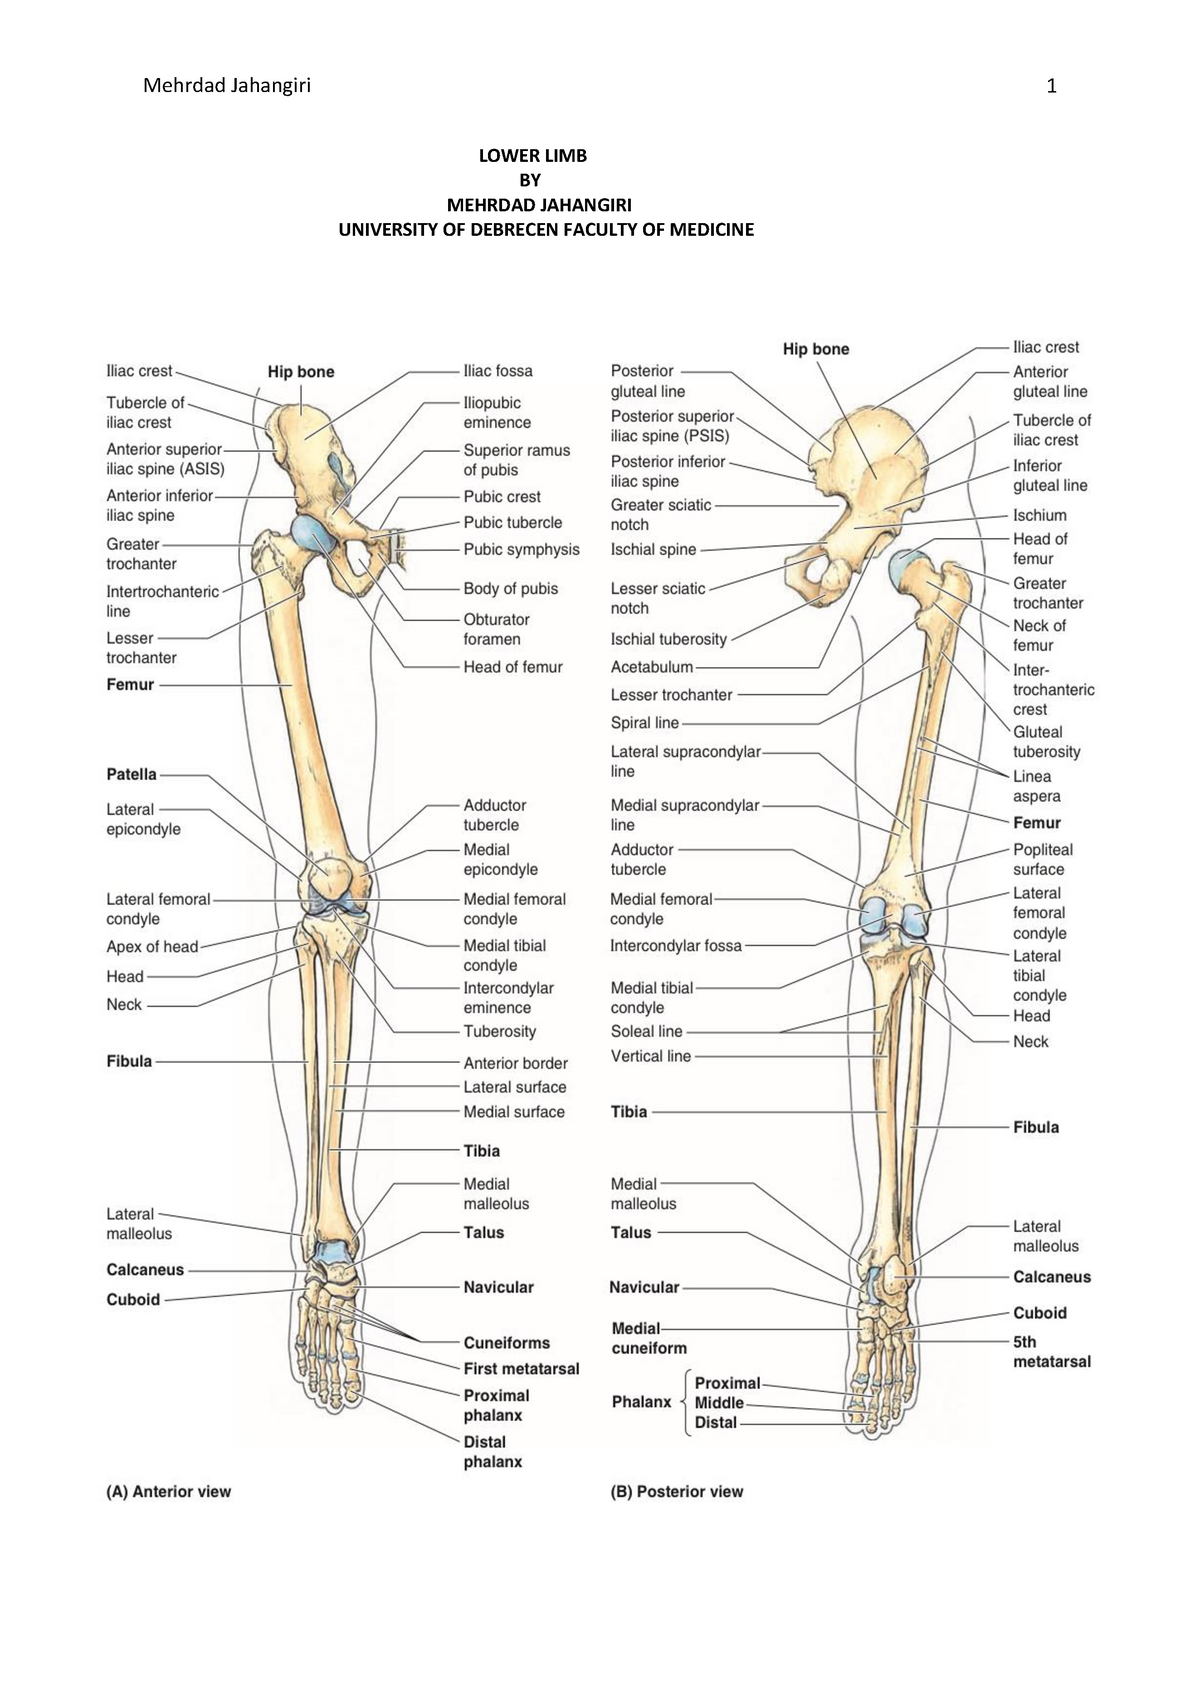 Lower-limb-mehrdad - short notes from Moore's Anatomy text book - StuDocu